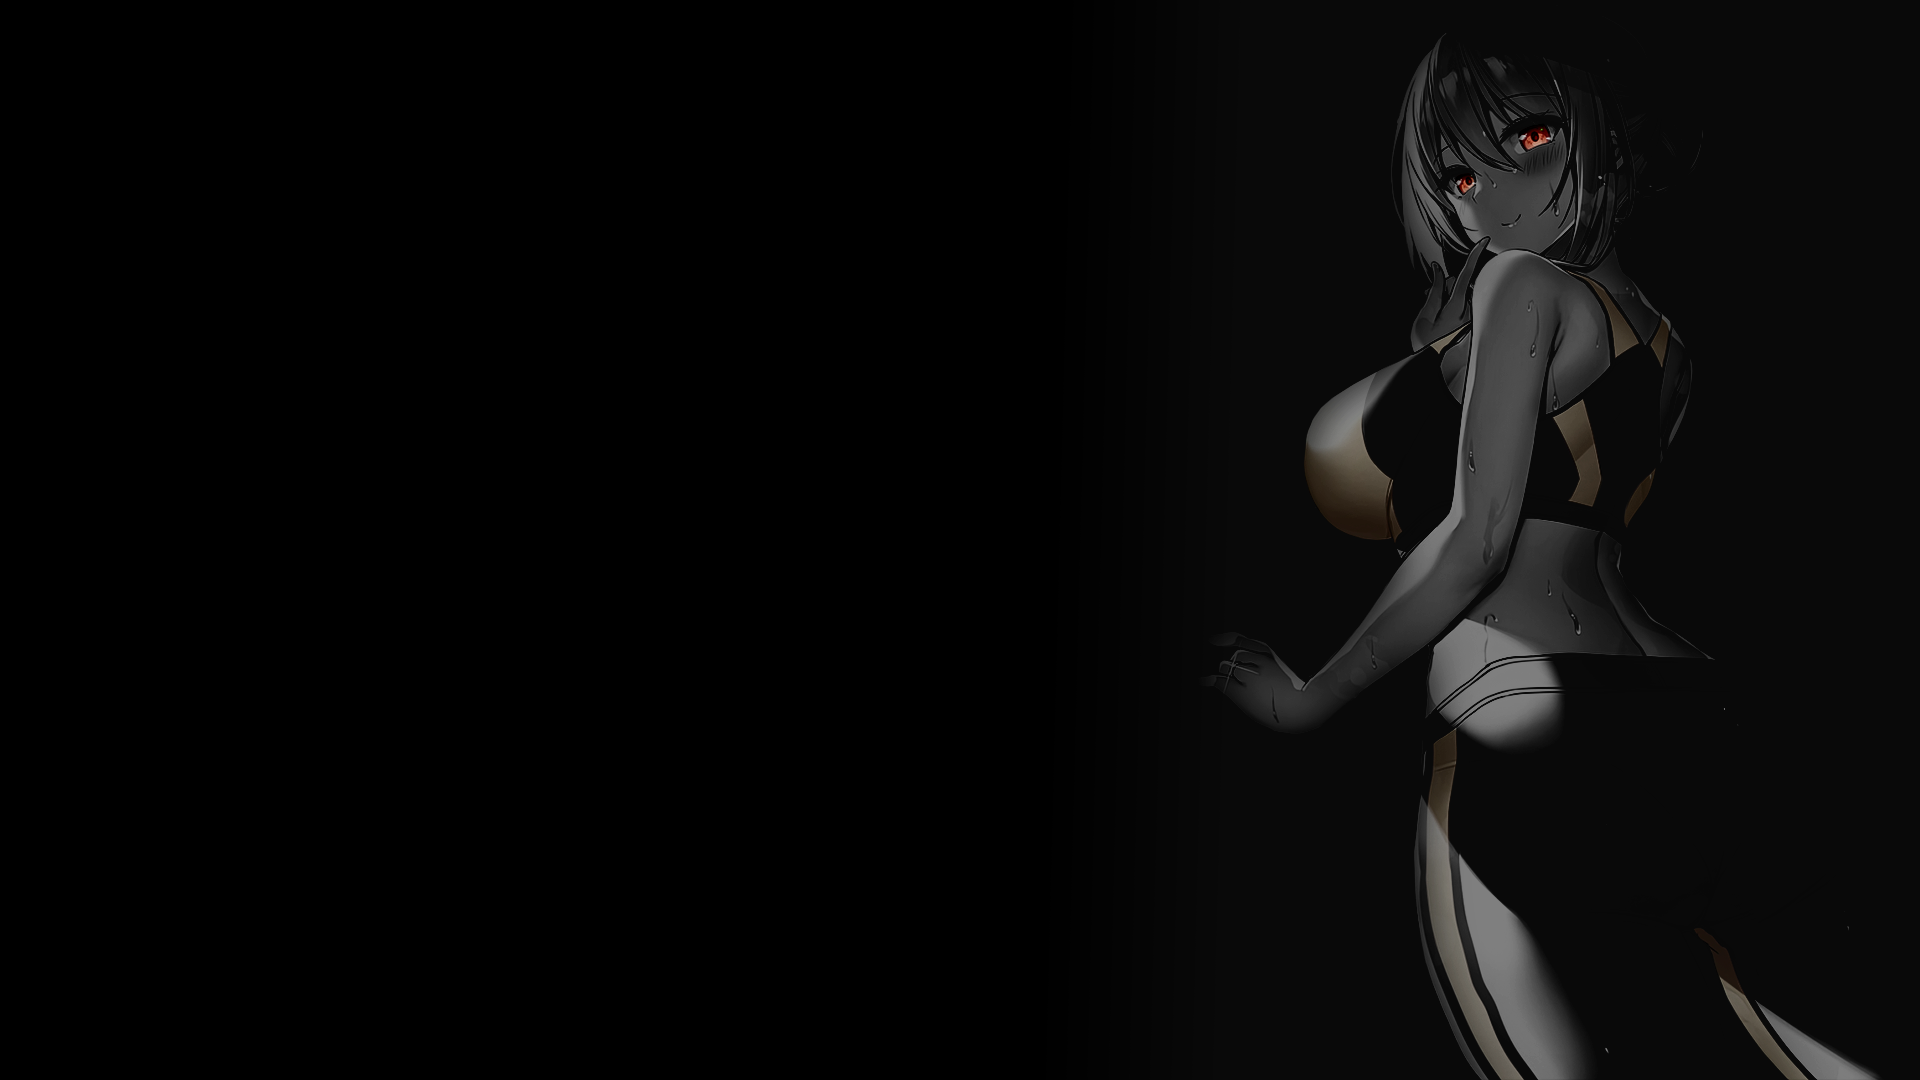 Anime 1920x1080 selective coloring black background dark background simple background anime girls big boobs sideboob